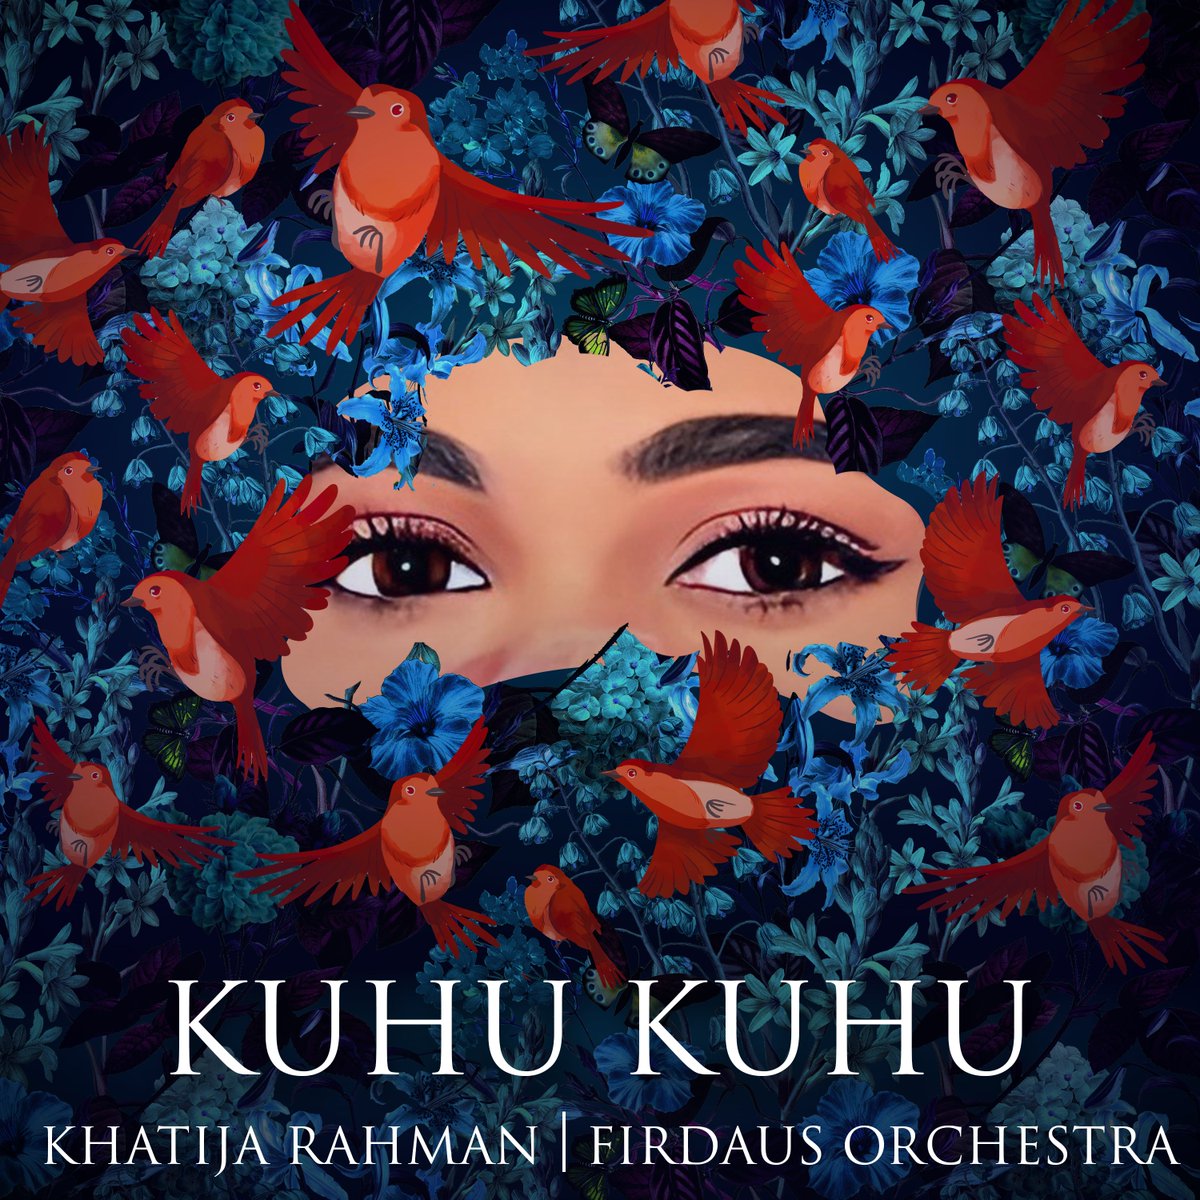 We couldn't be more proud to have collaborated with the talented @KhatijaRahman on her latest album ‘Kuhu Kuhu’. Congratulations to Khatija and the entire team for their hard work and dedication. #FirdausOrchestra #Album @arrahman